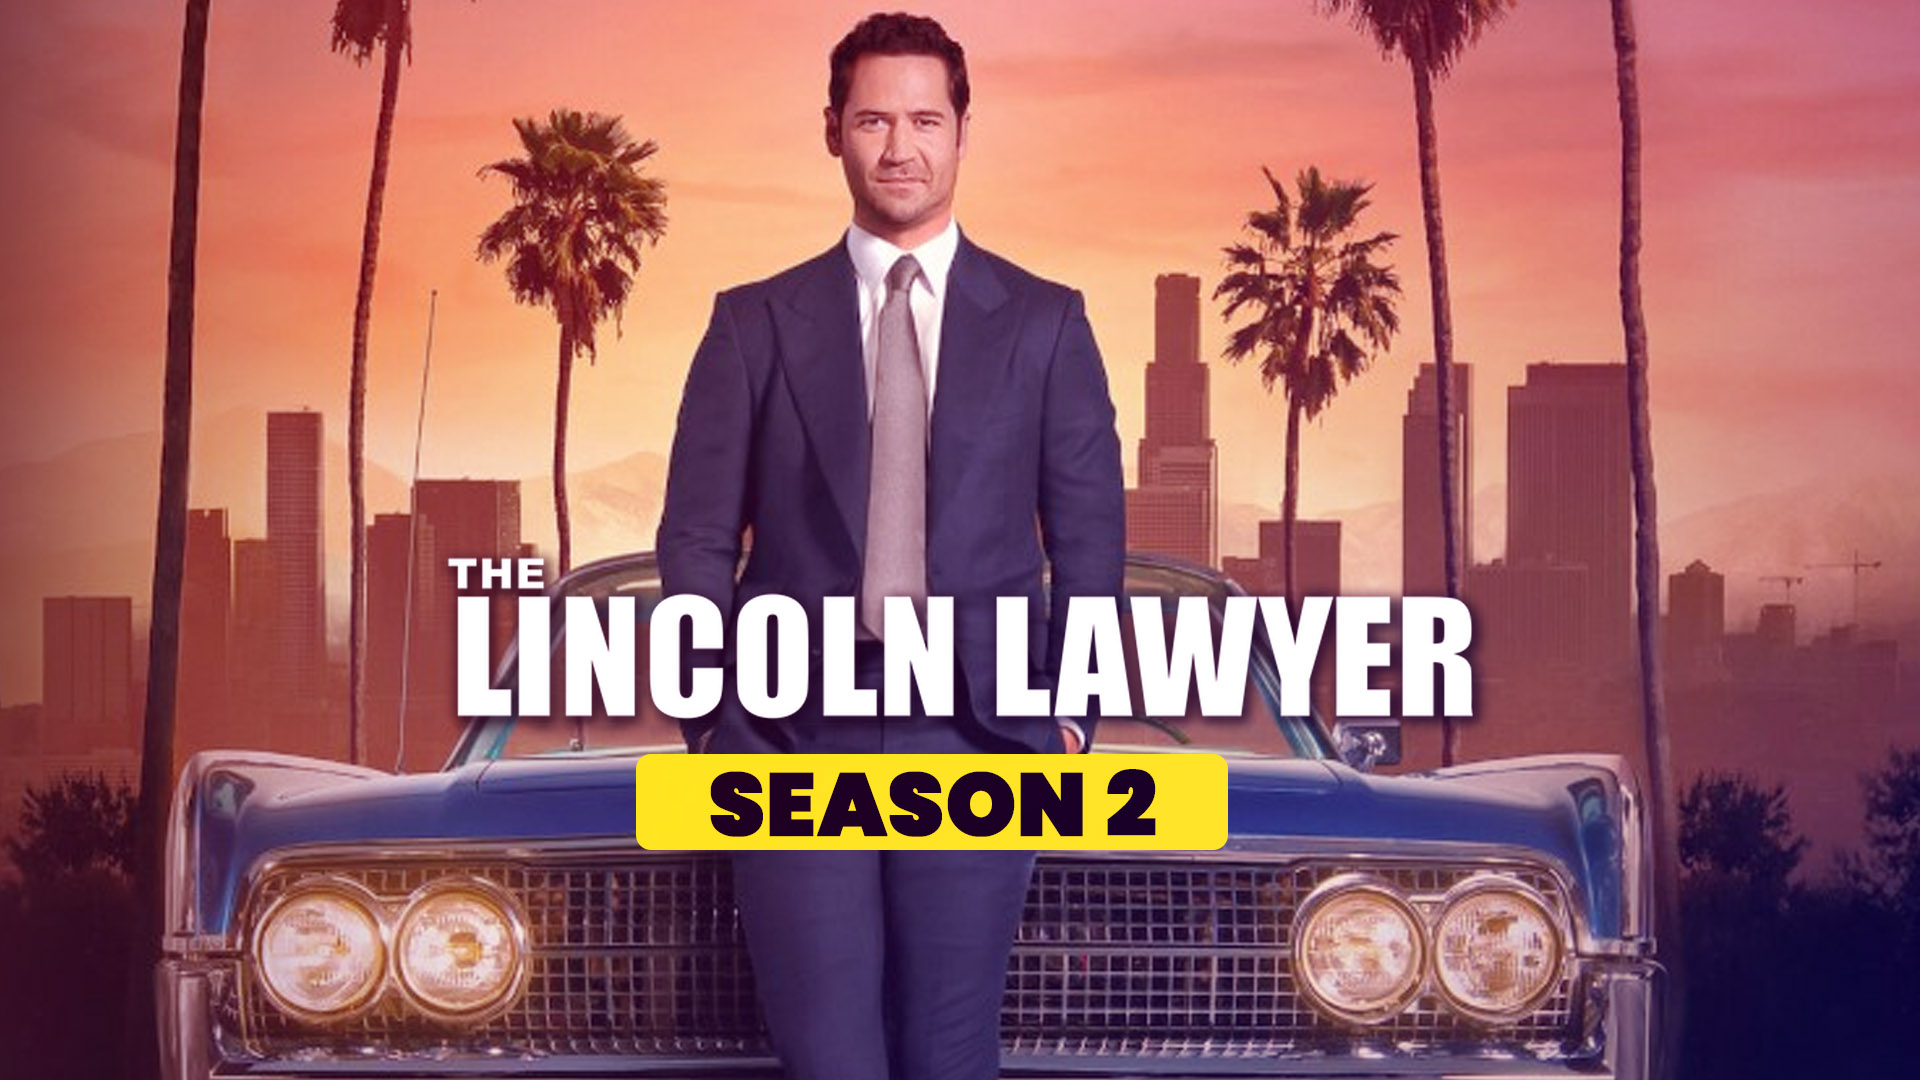 When Is The Lincoln Lawyer Season 2 Releasing? Daily Research Plot